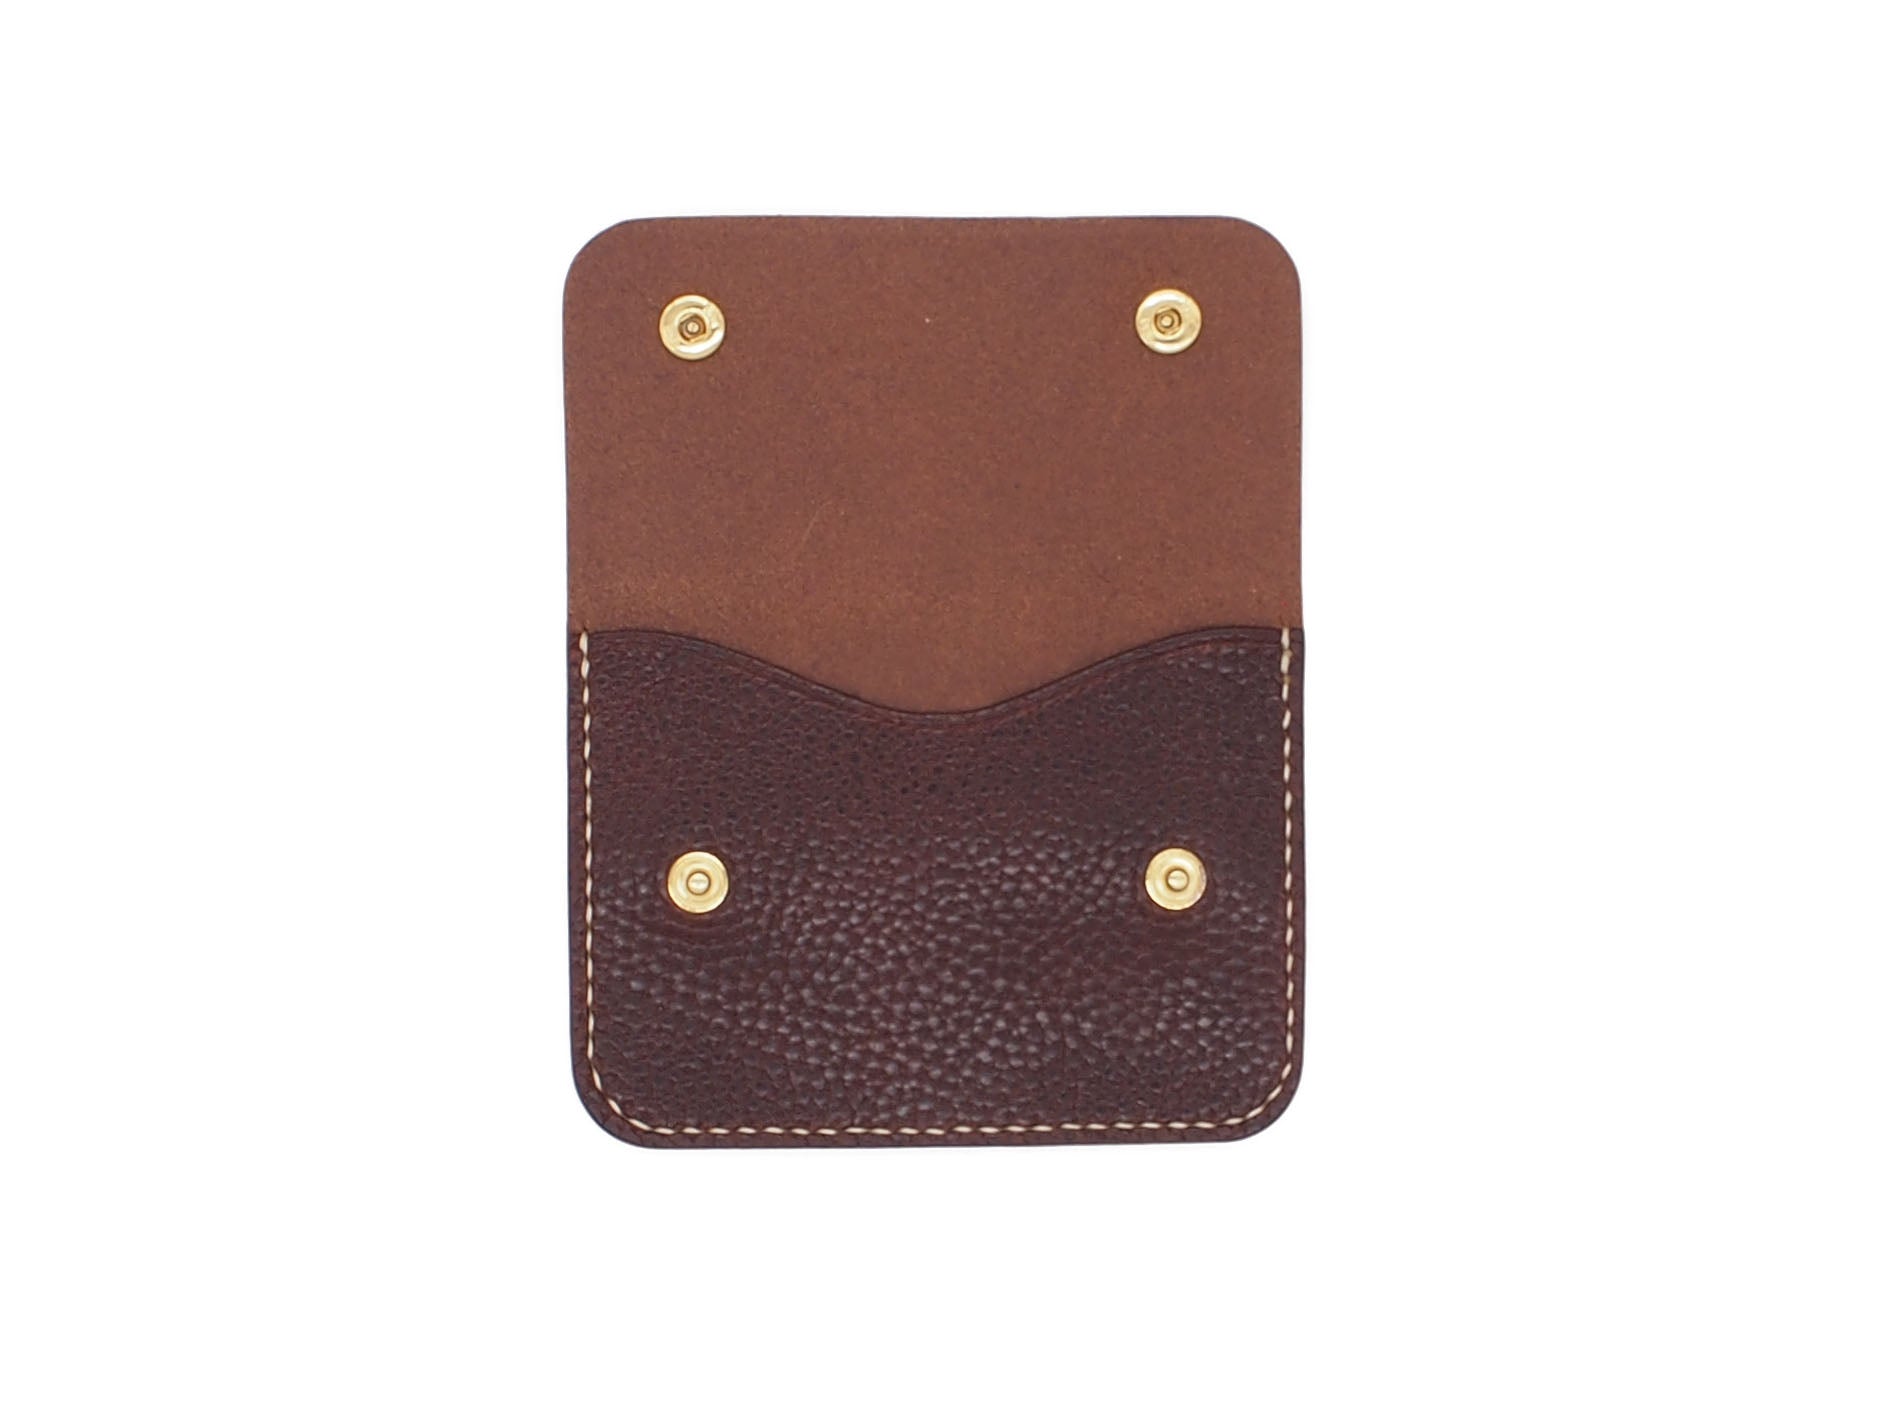 Utility Pocket - Snap Pouch Wallet In Pebbled Burgundy